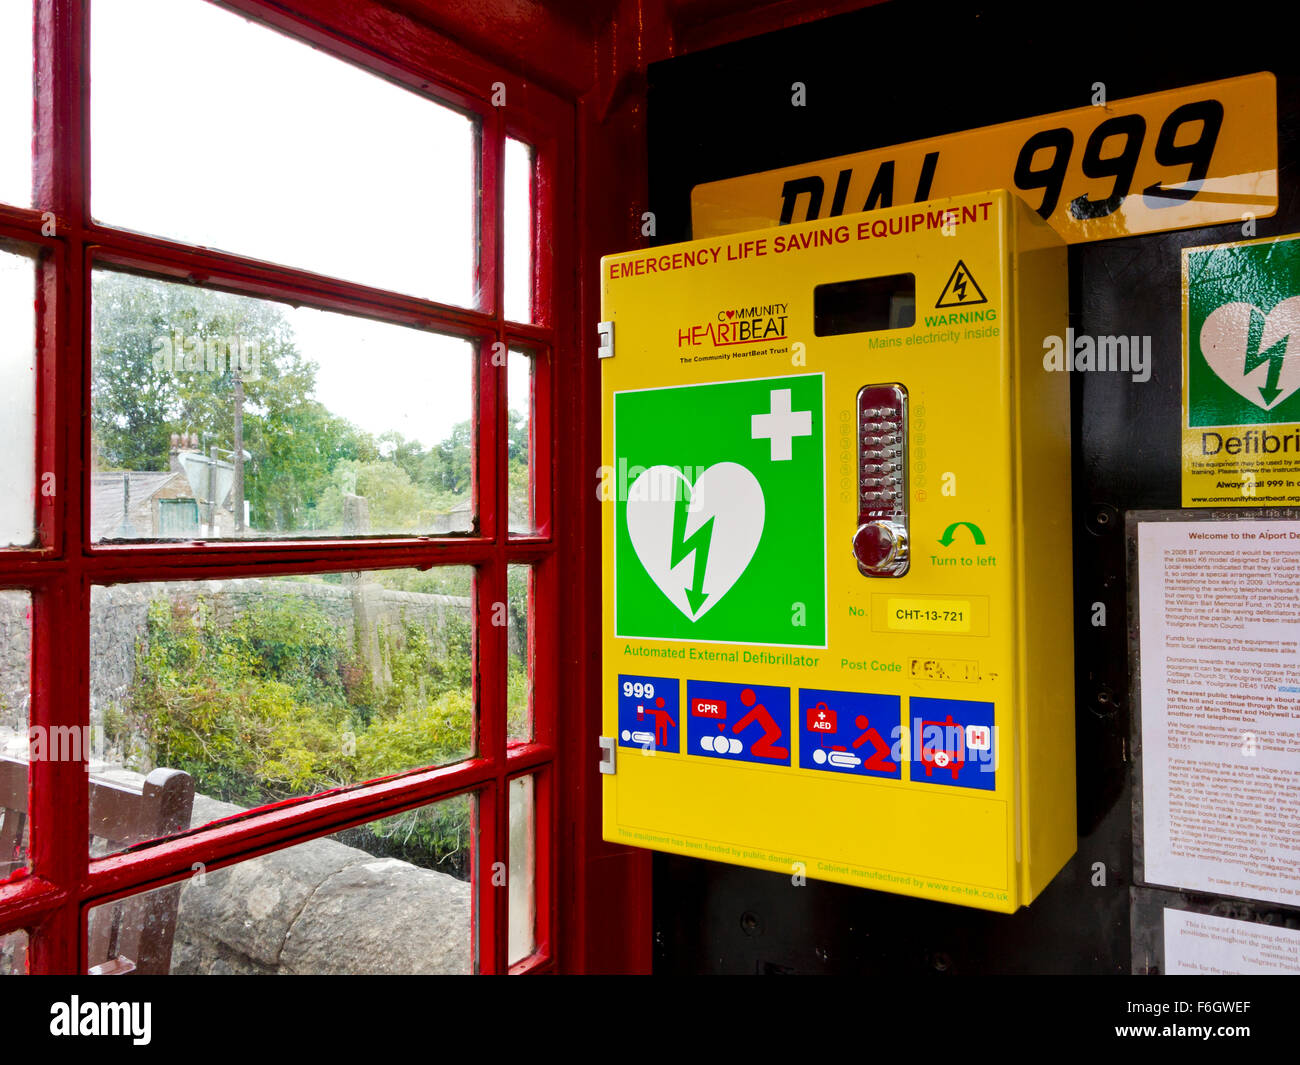 Defibrillator Emergency Life Saving Equipment installed in old red telephone box in Alport village Derbyshire Dales England UK Stock Photo